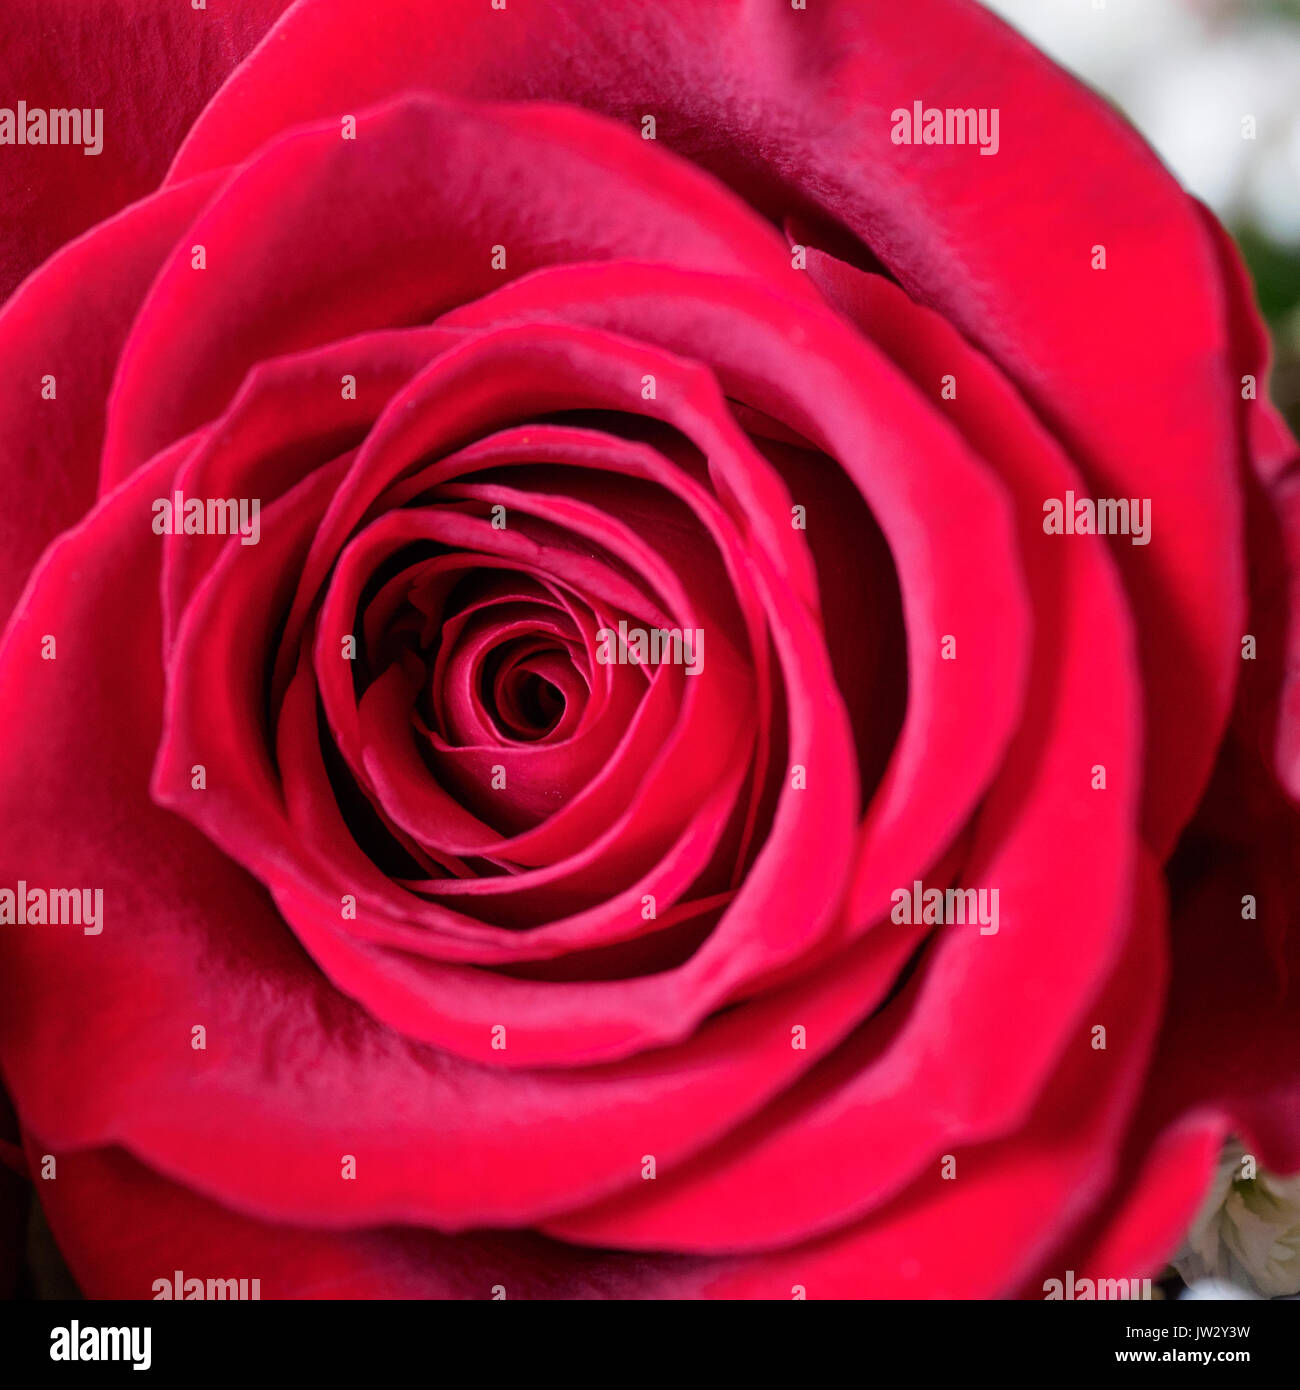 Red rose close-up. Square format. Stock Photo